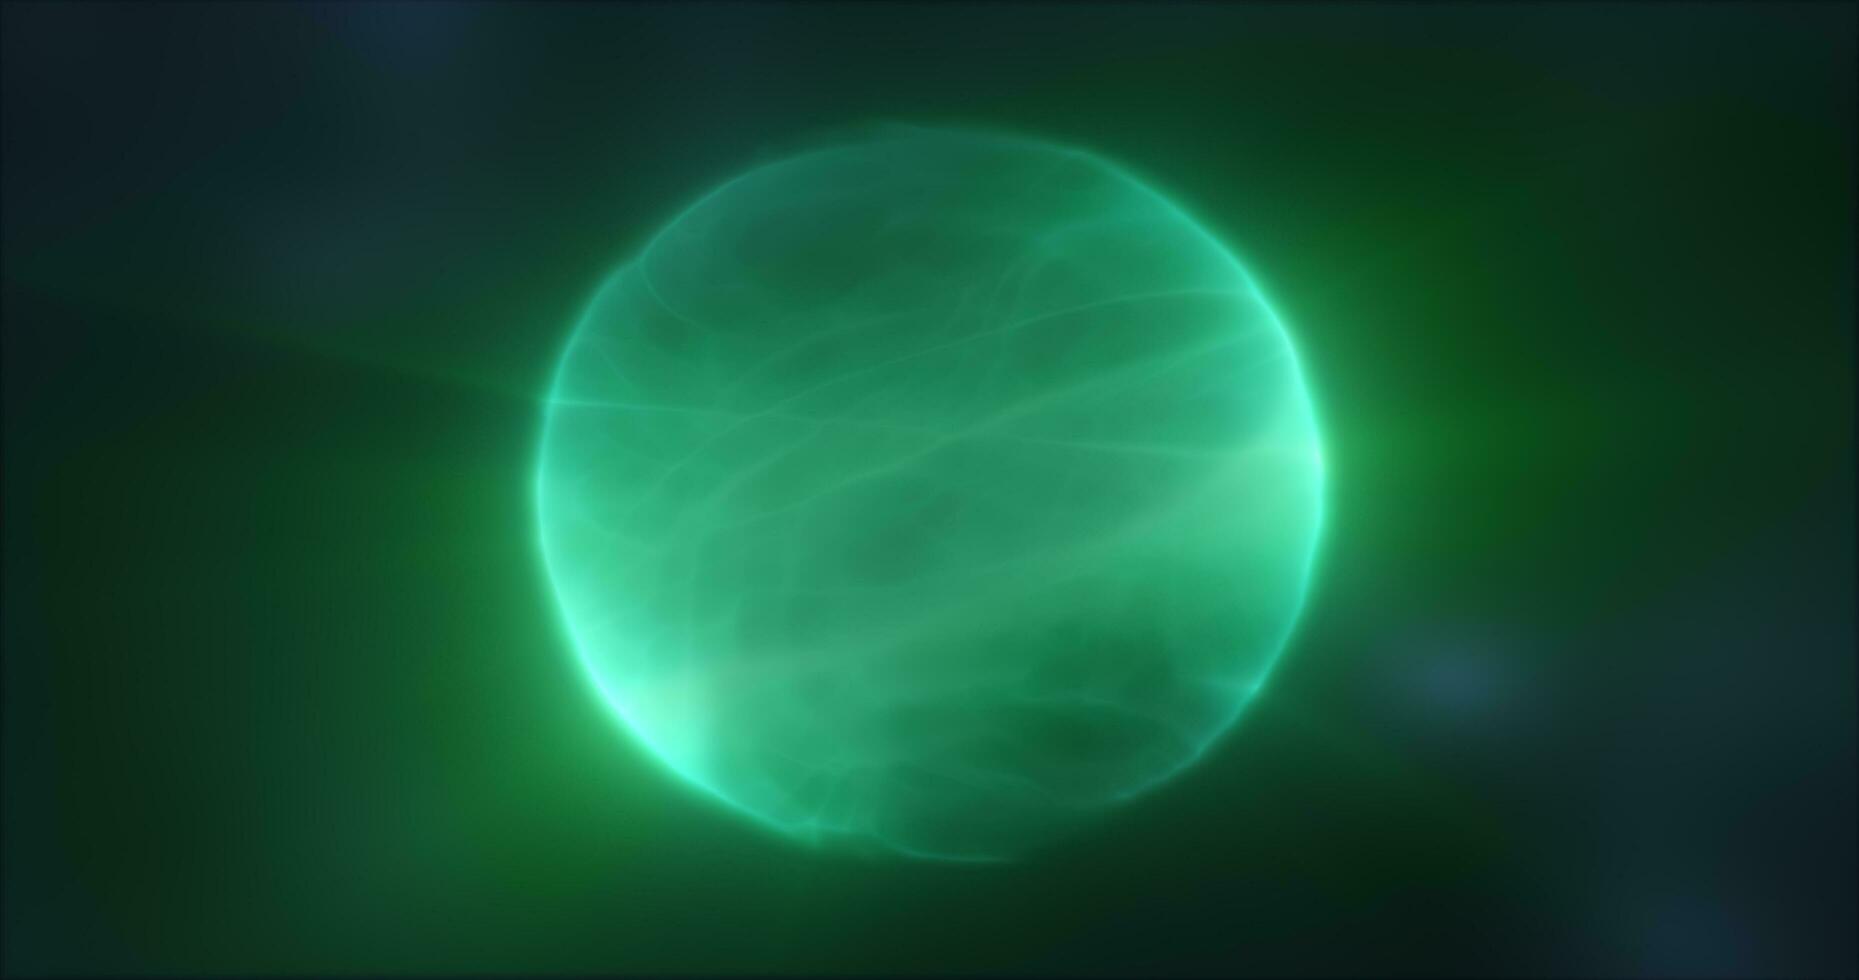 Abstract green energy sphere round glowing magical digital futuristic space background photo